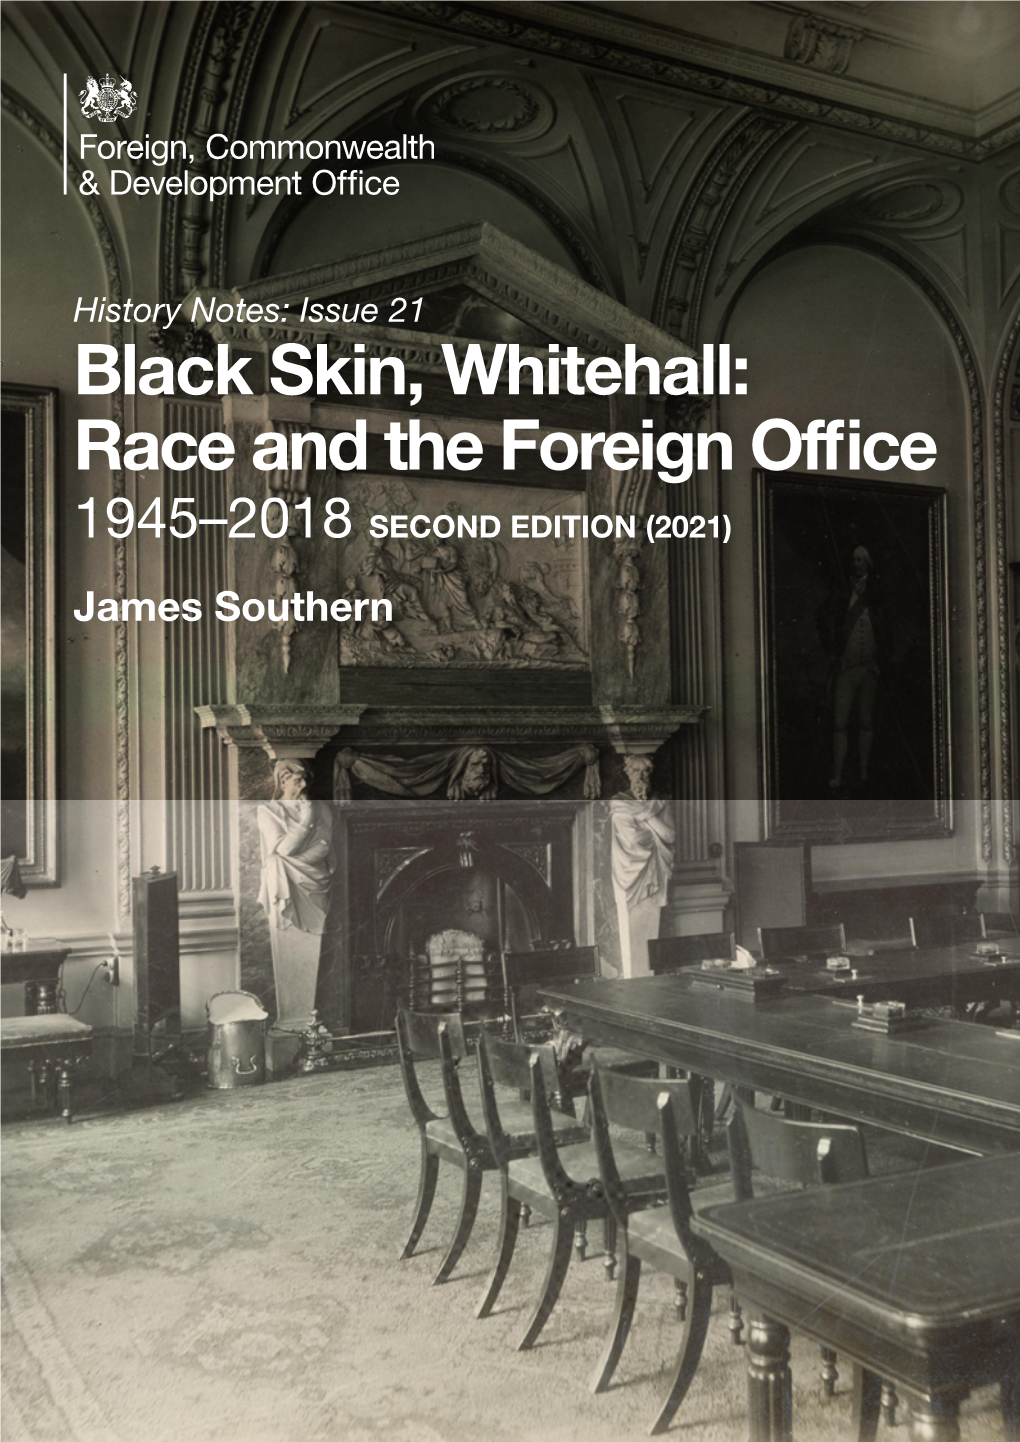 Race and the Foreign Office 1945–2018 SECOND EDITION (2021) James Southern